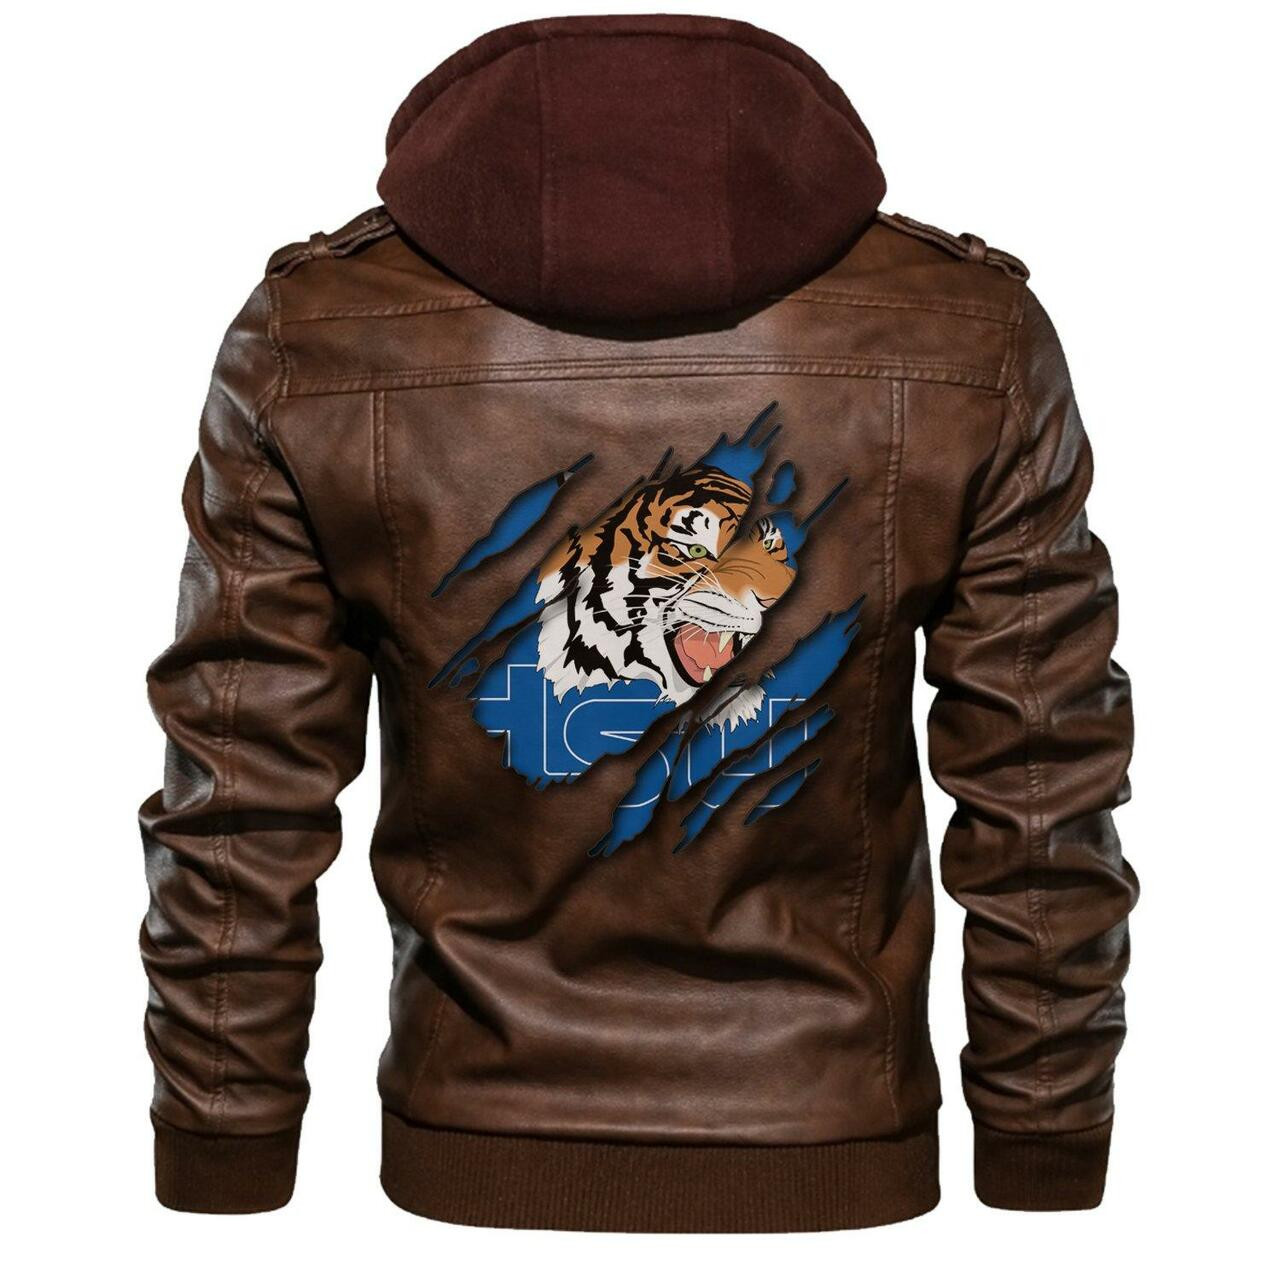 Our store has all of the latest leather jacket 21